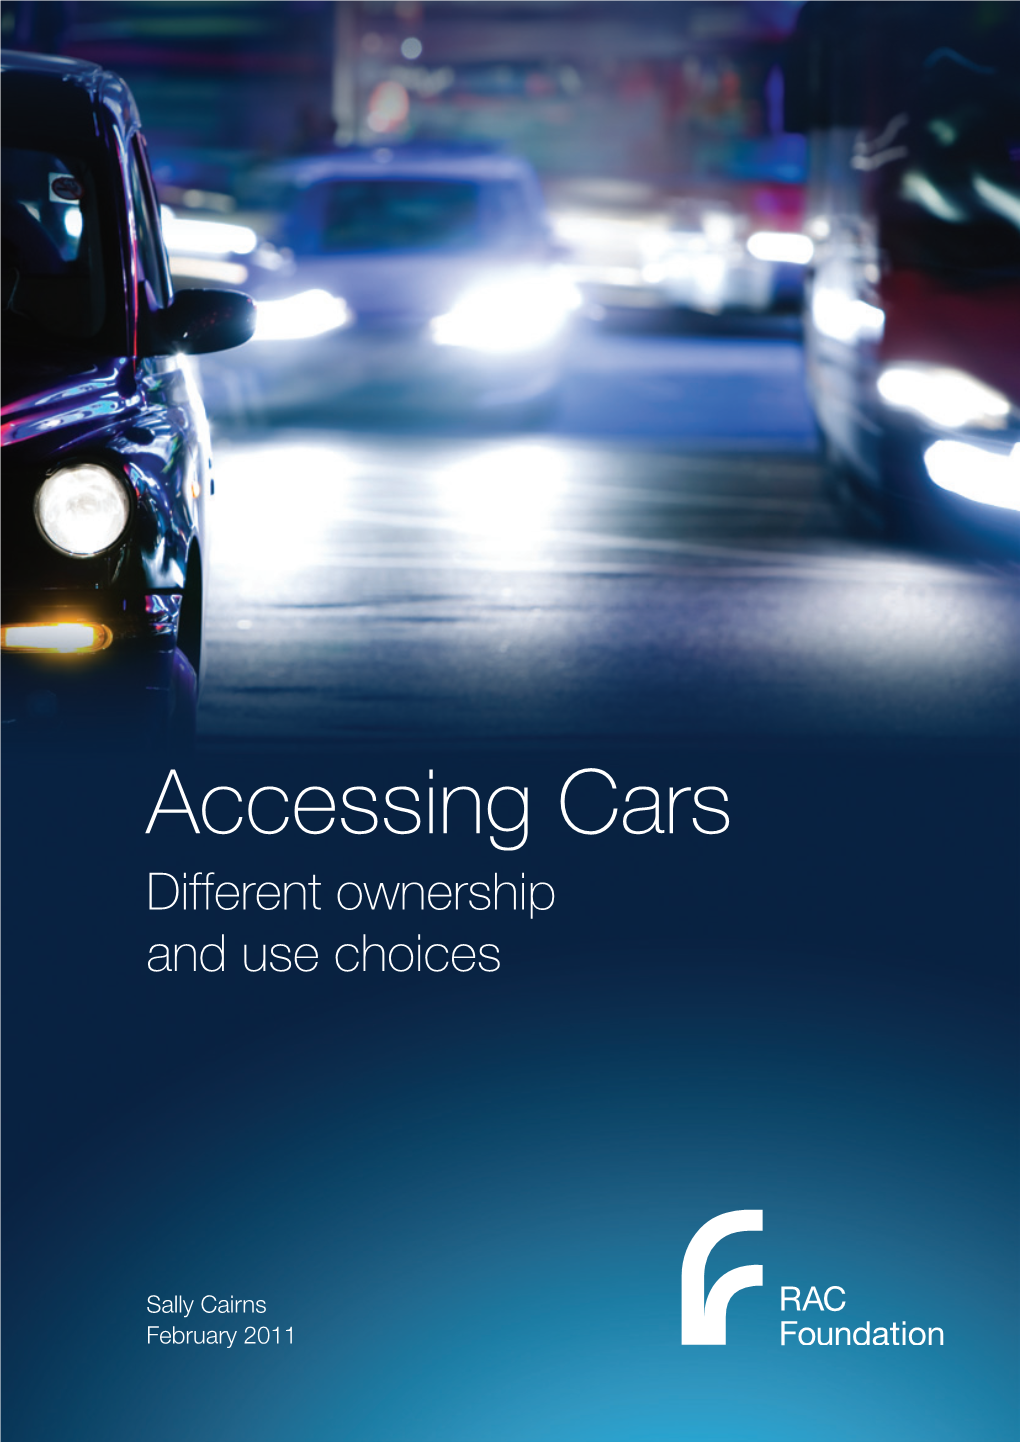 Accessing Cars Different Ownership and Use Choices